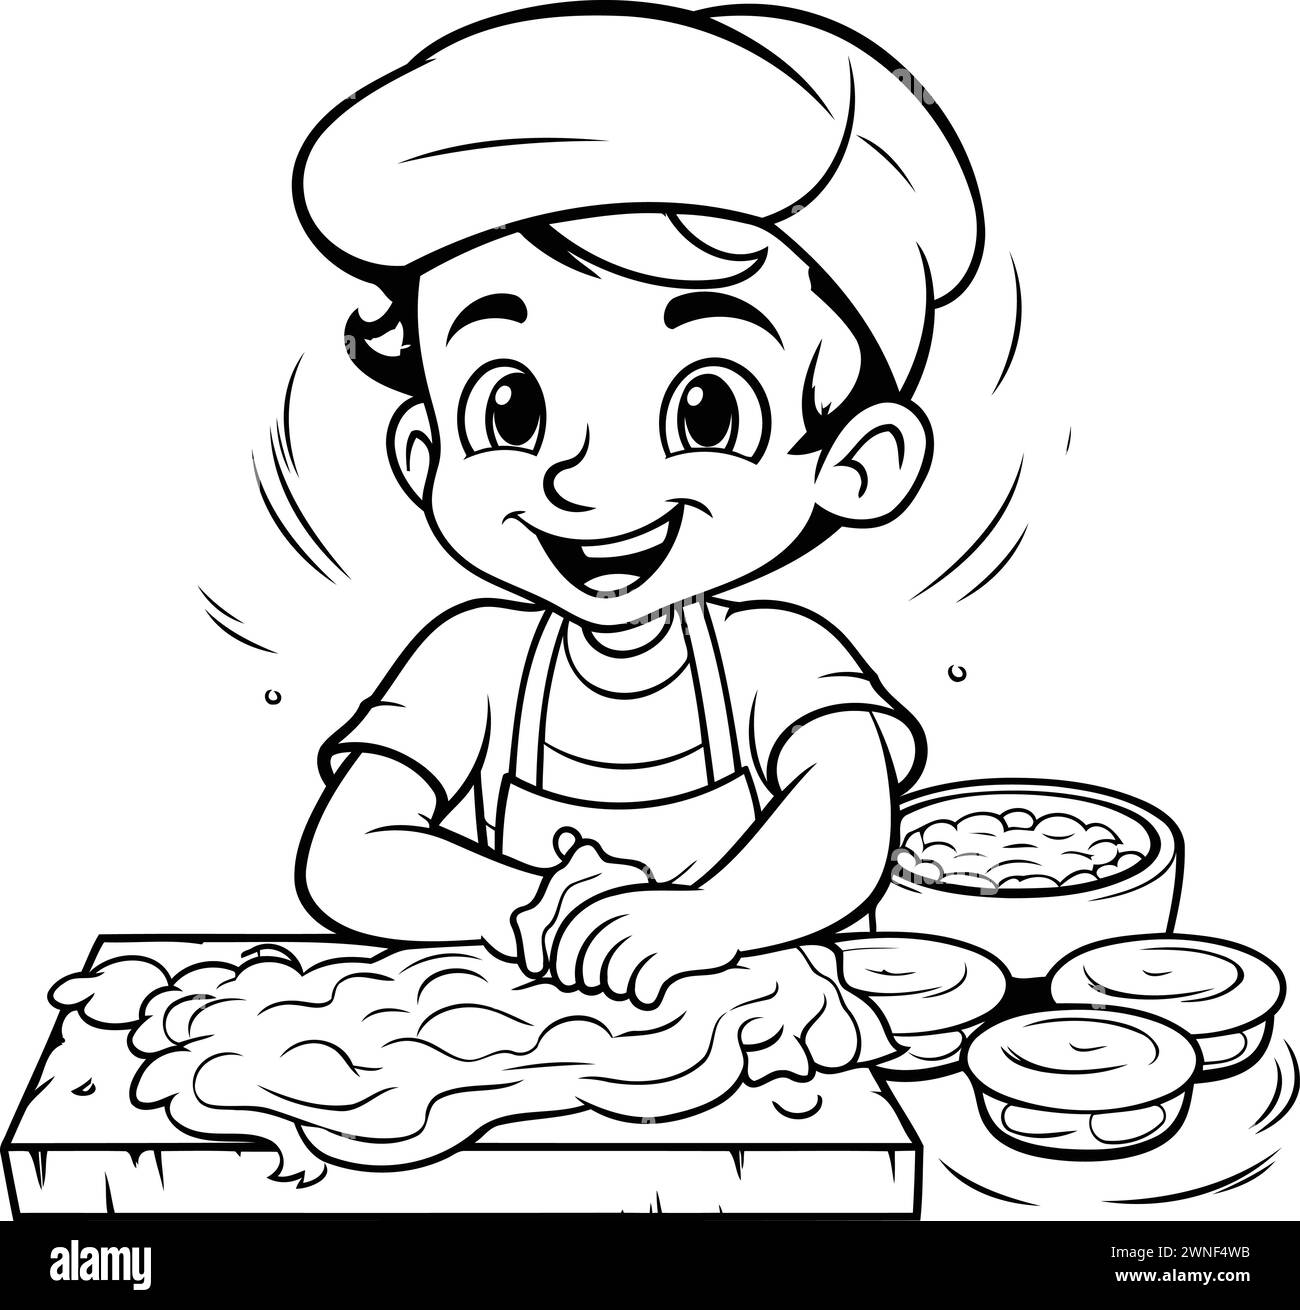 Black and White Cartoon Illustration of Cute Little Boy Cooking Food for Coloring Book Stock Vector